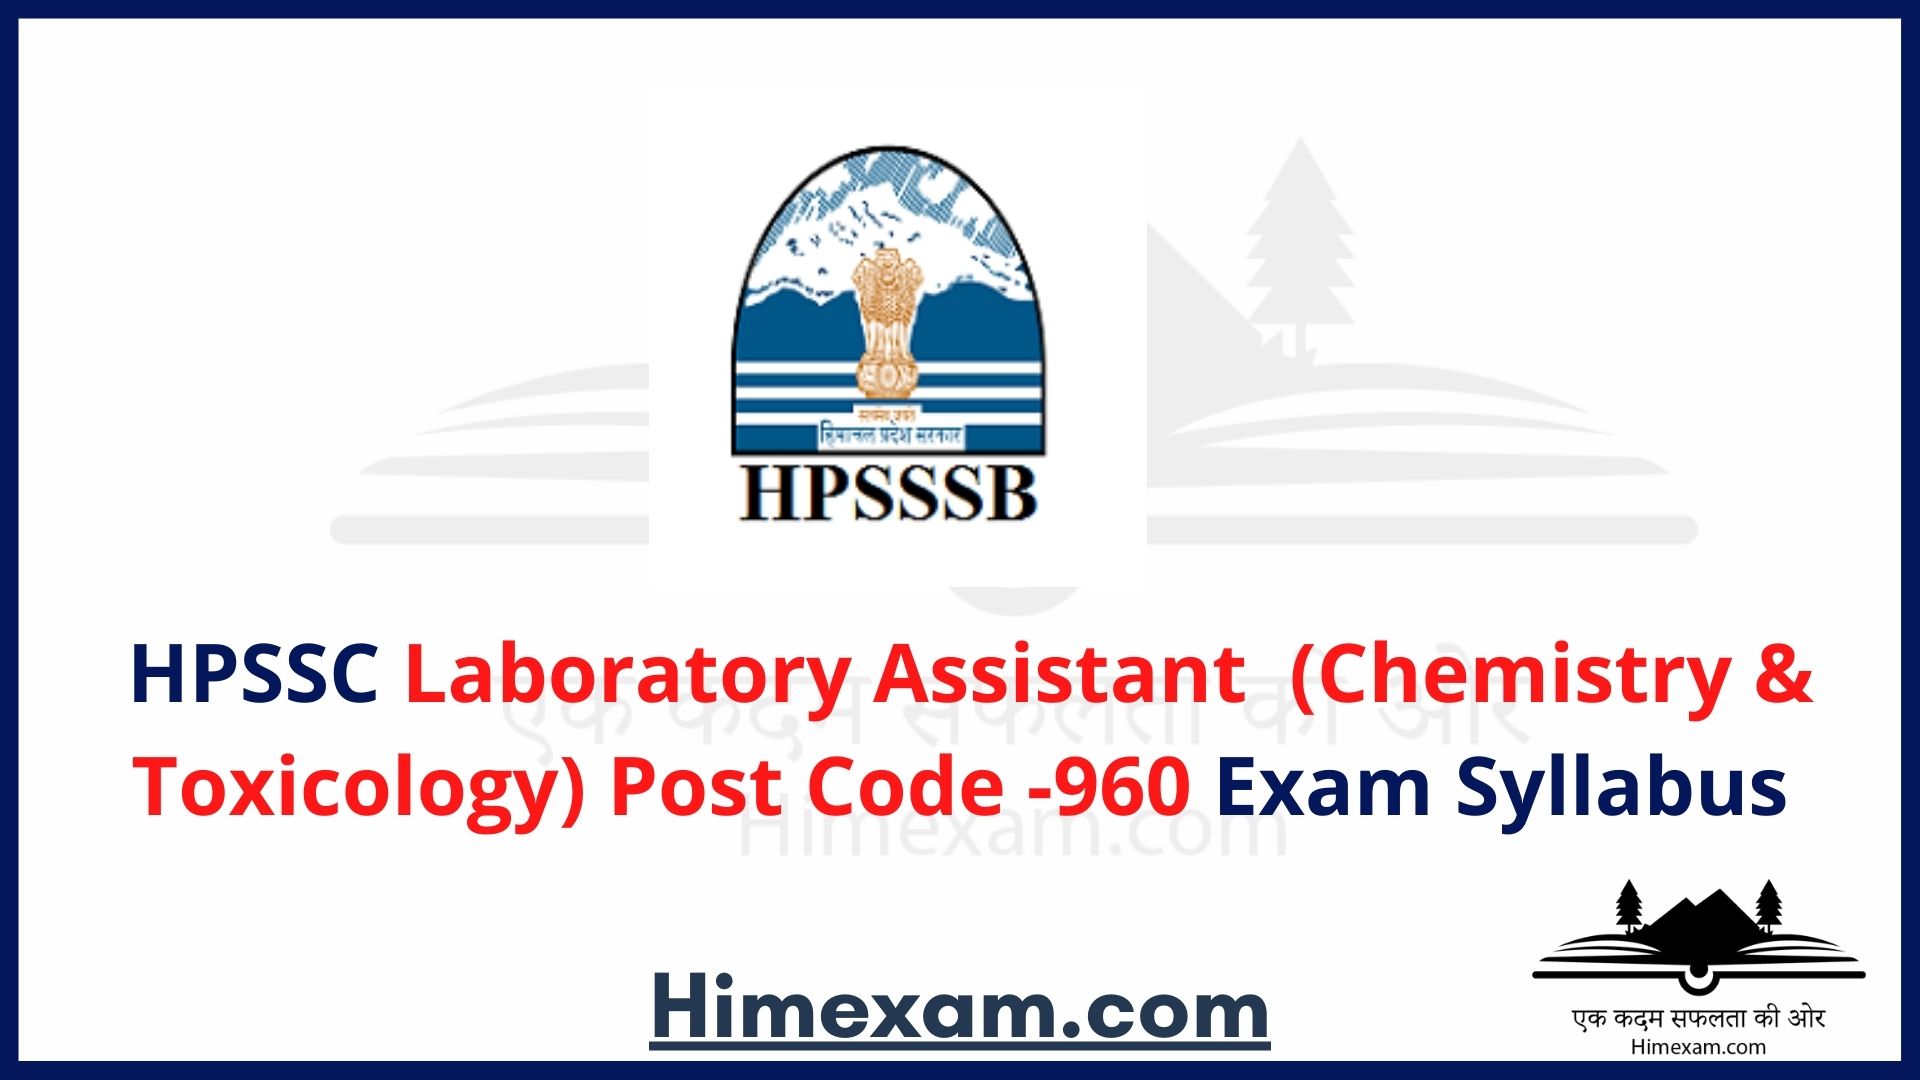 HPSSC Laboratory Assistant (Chemistry & Toxicology)  Post Code 960 Exam Syllabus